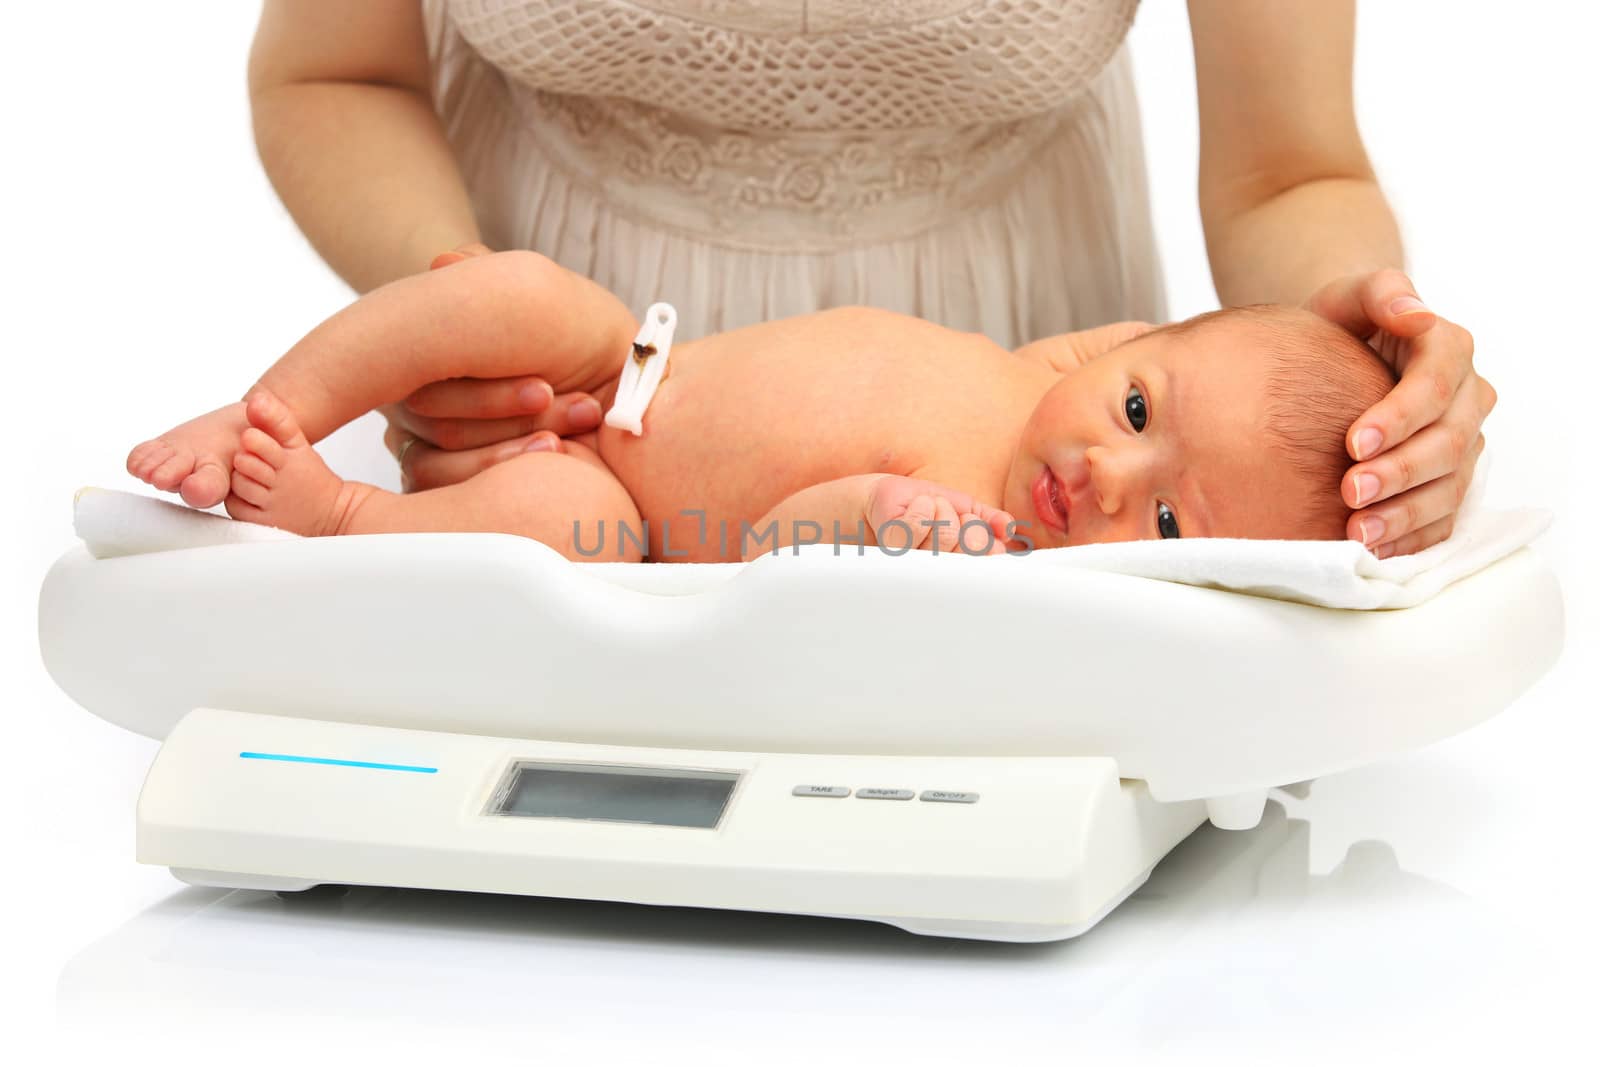 Mother and her newborn baby on a weight scale over white background